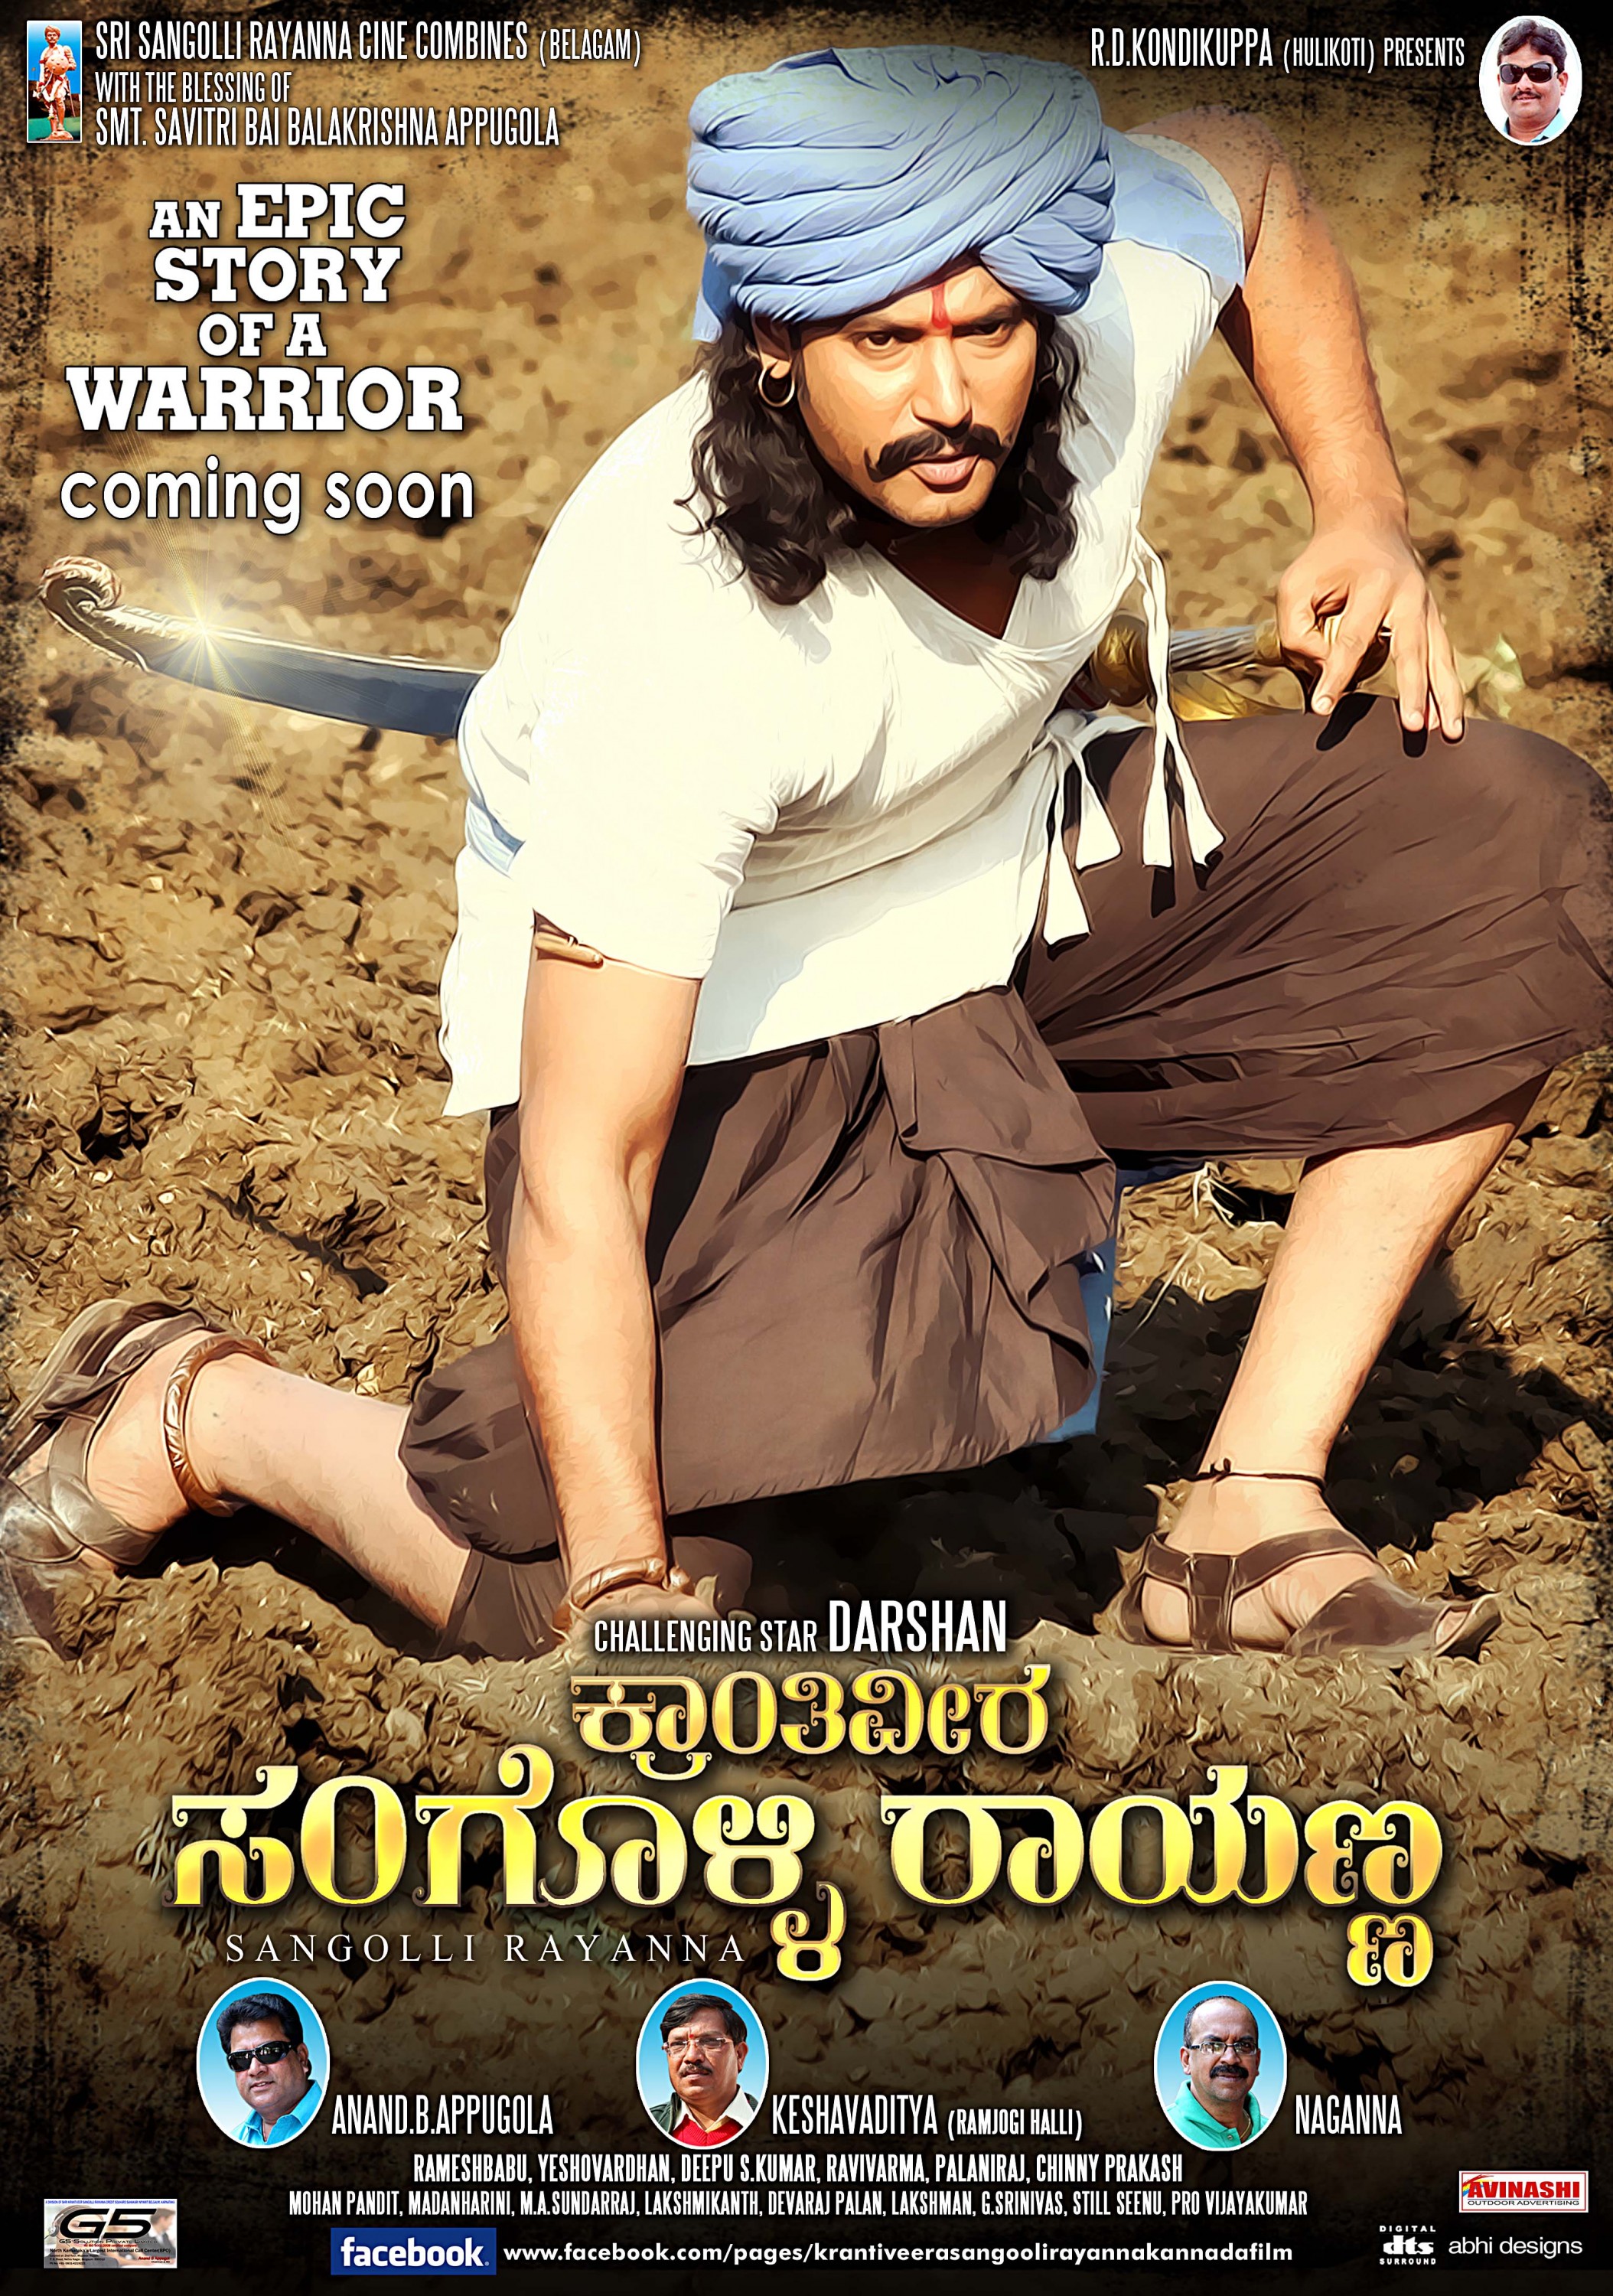 Mega Sized Movie Poster Image for Sangolli Rayanna (#27 of 79)